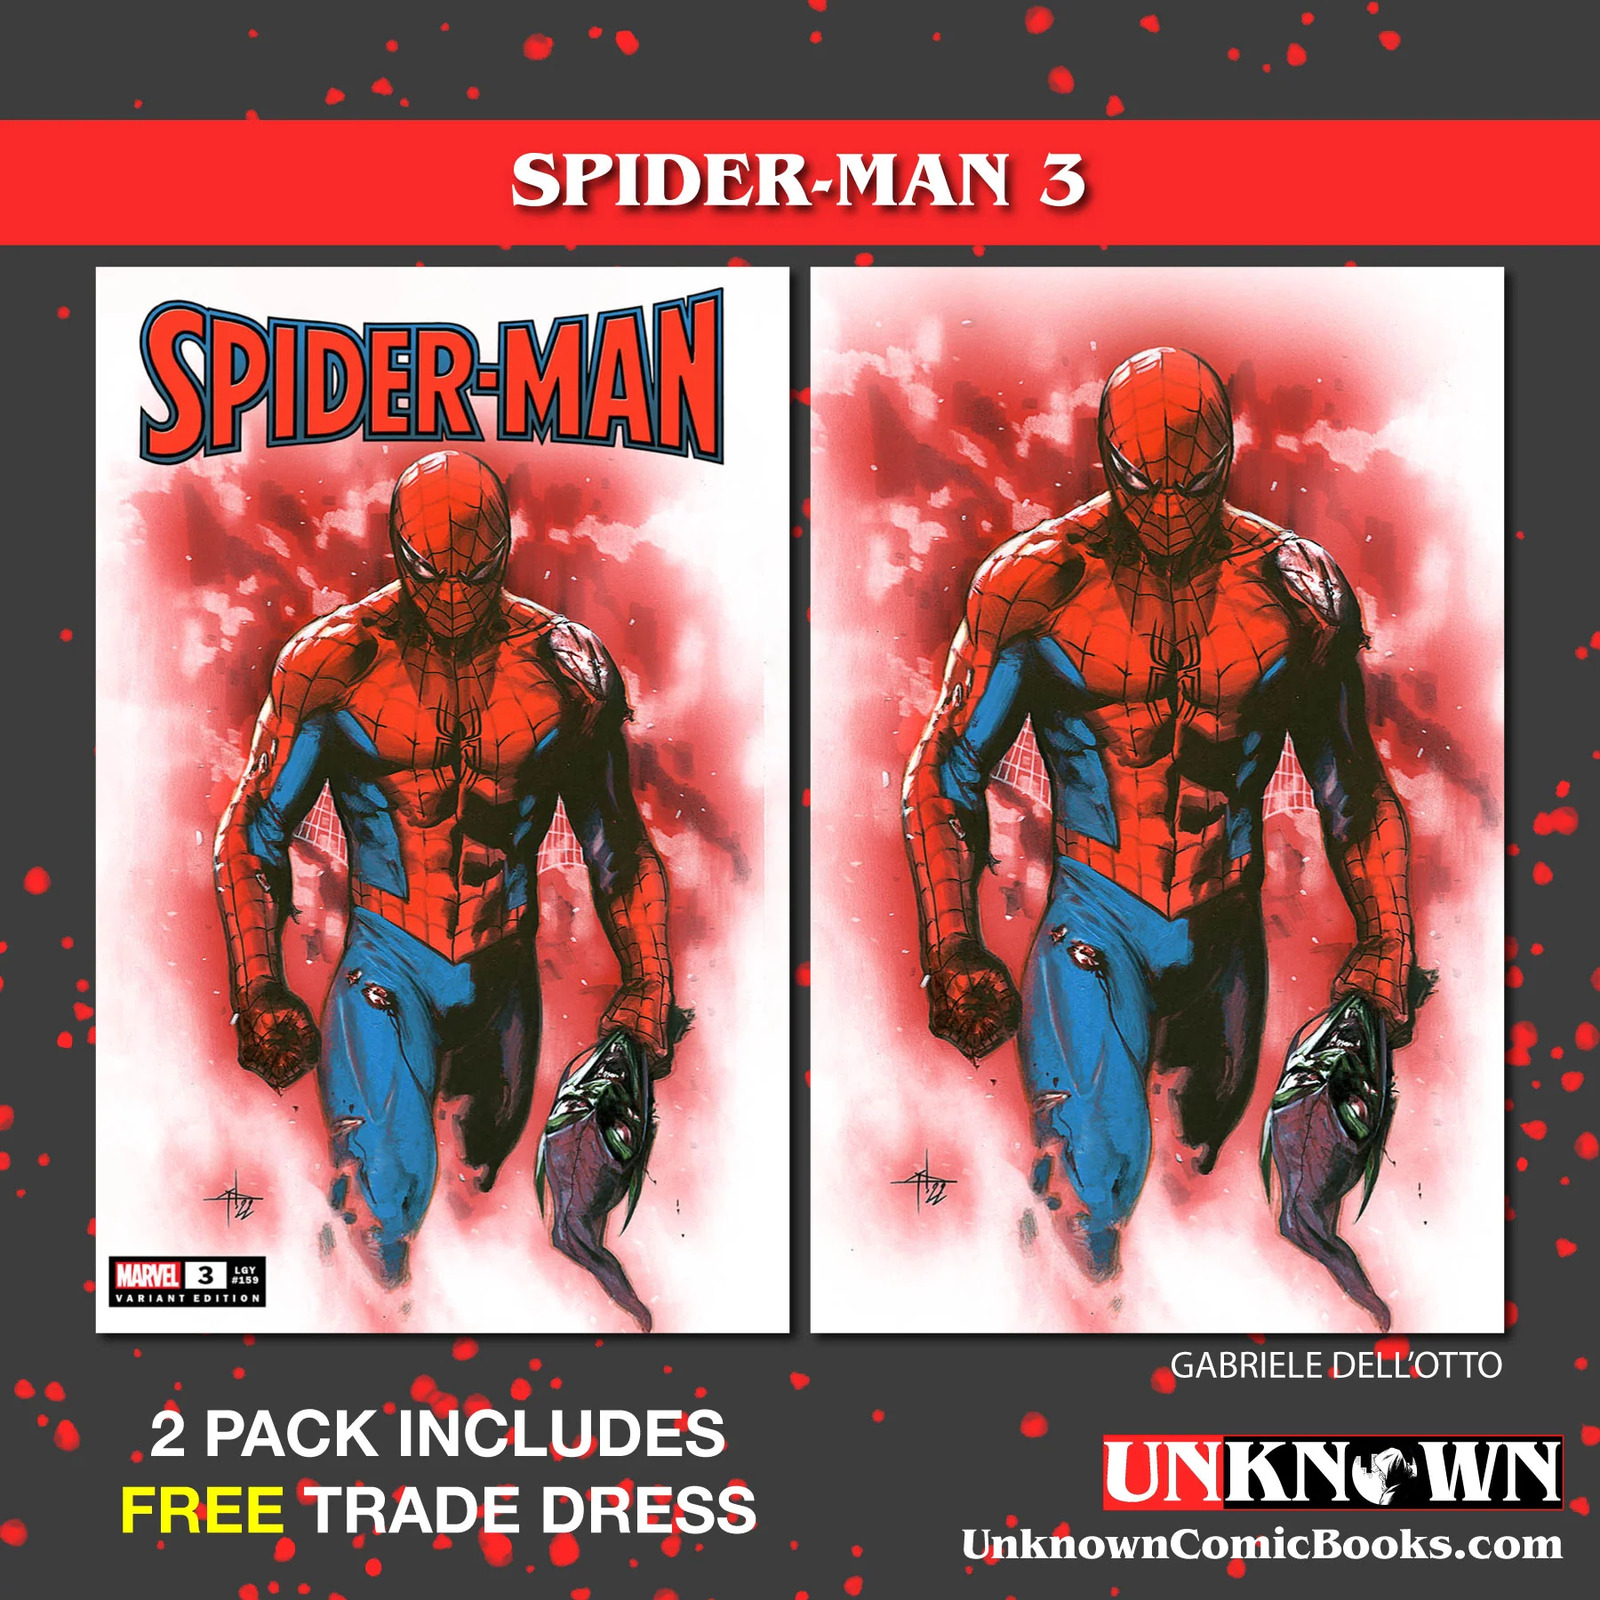 2 PACK **FREE TRADE DRESS** SPIDER-MAN #3 UNKNOWN COMICS DELL\'OTTO EXCLUSIVE VAR